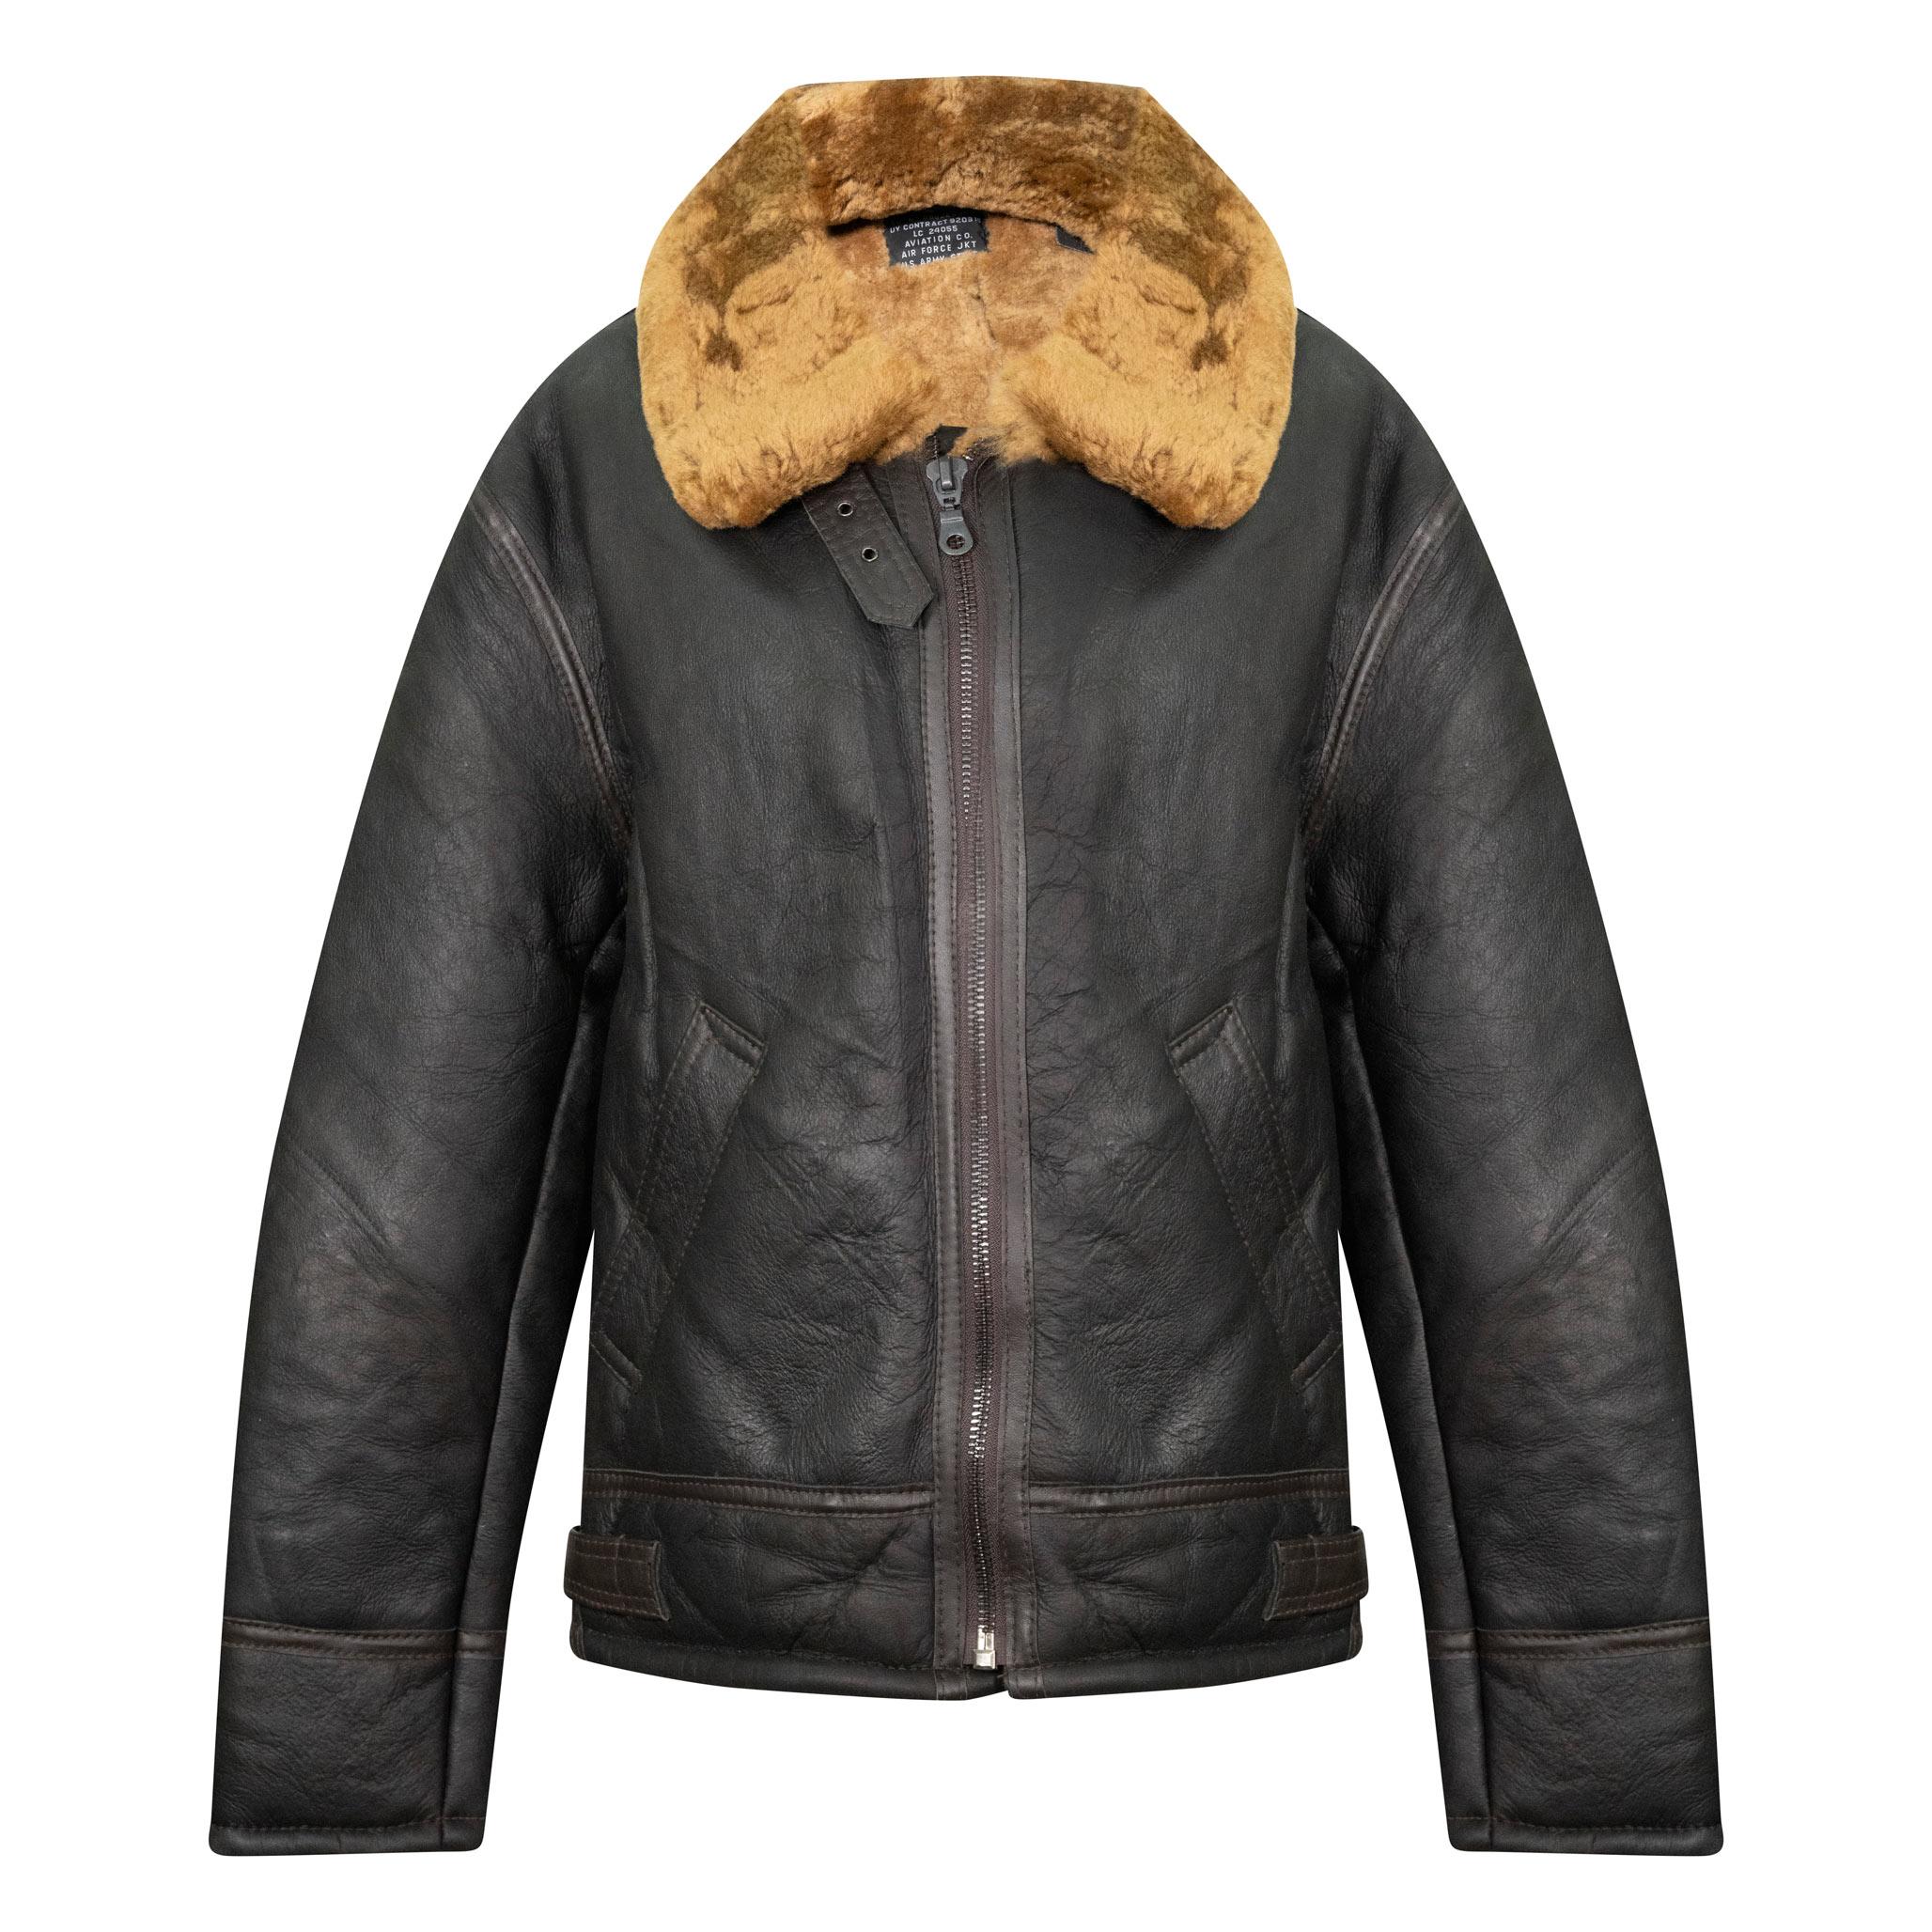 A thick sheepskin jacket in brown with ginger interior fur. Waist length